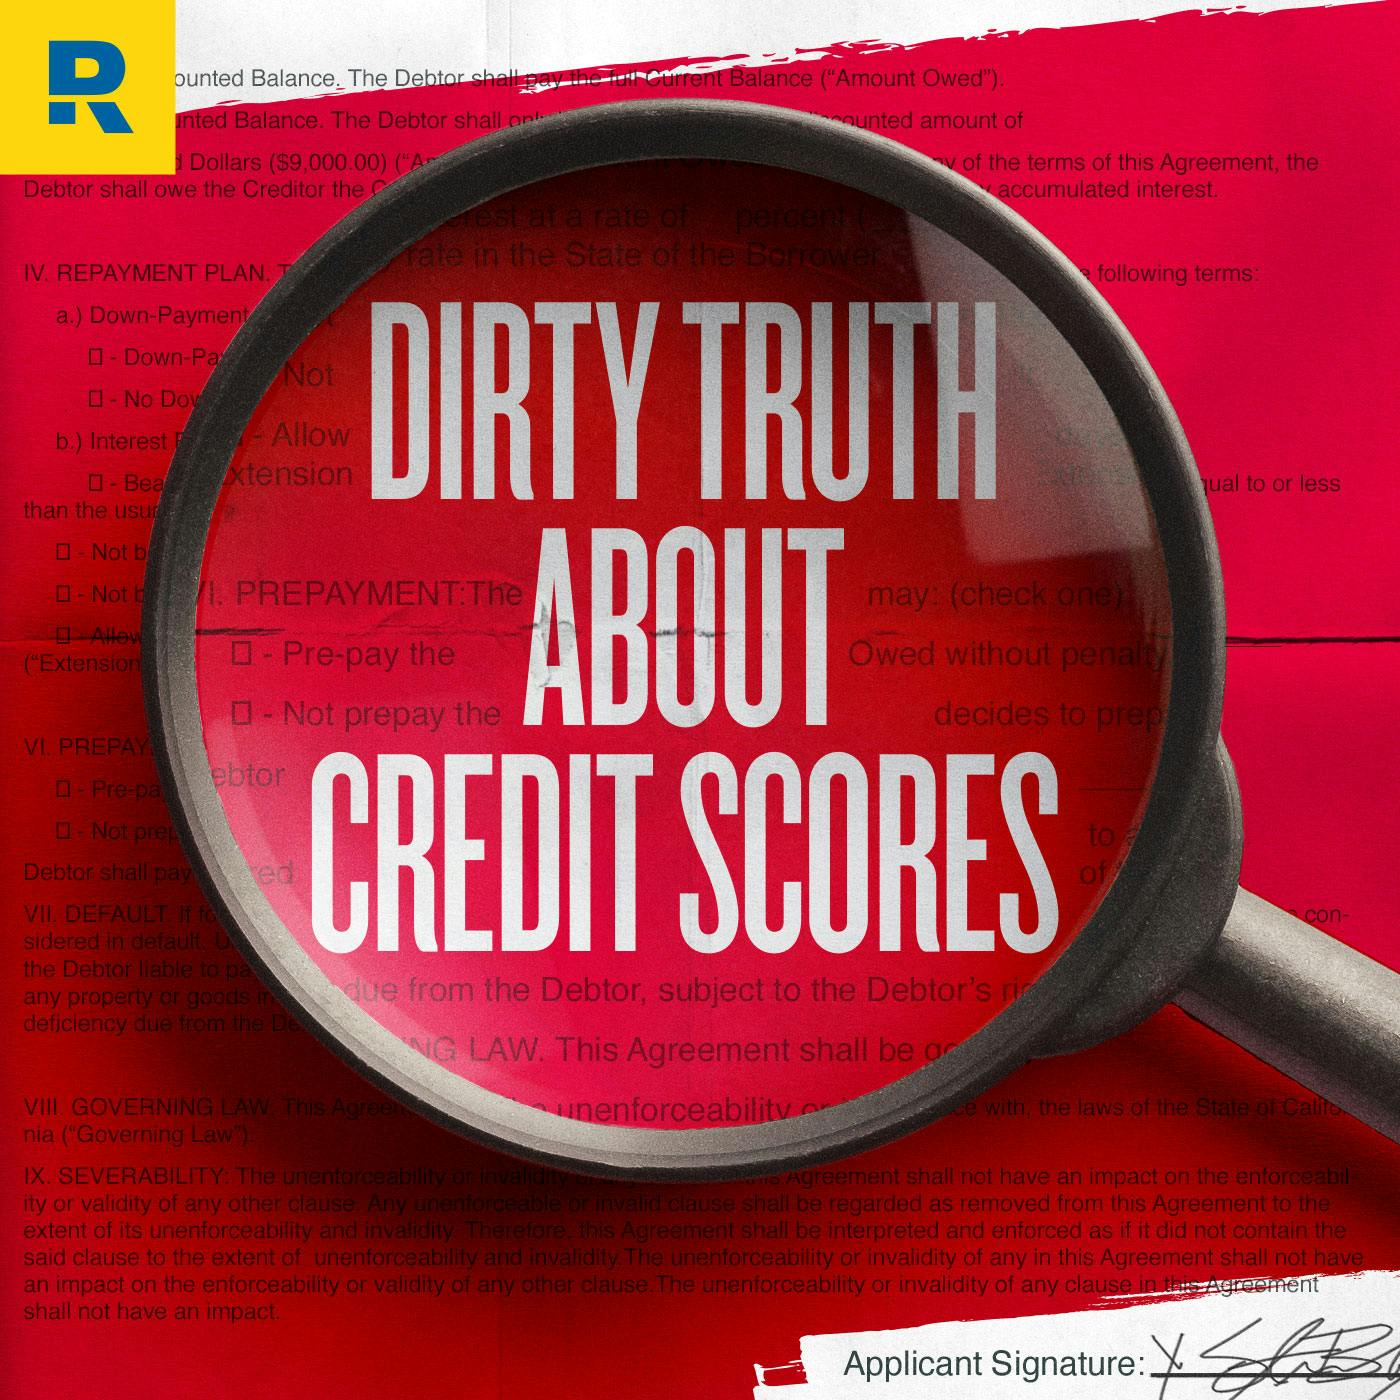 Ep 7: The Dirty Truth Behind Your Credit Score